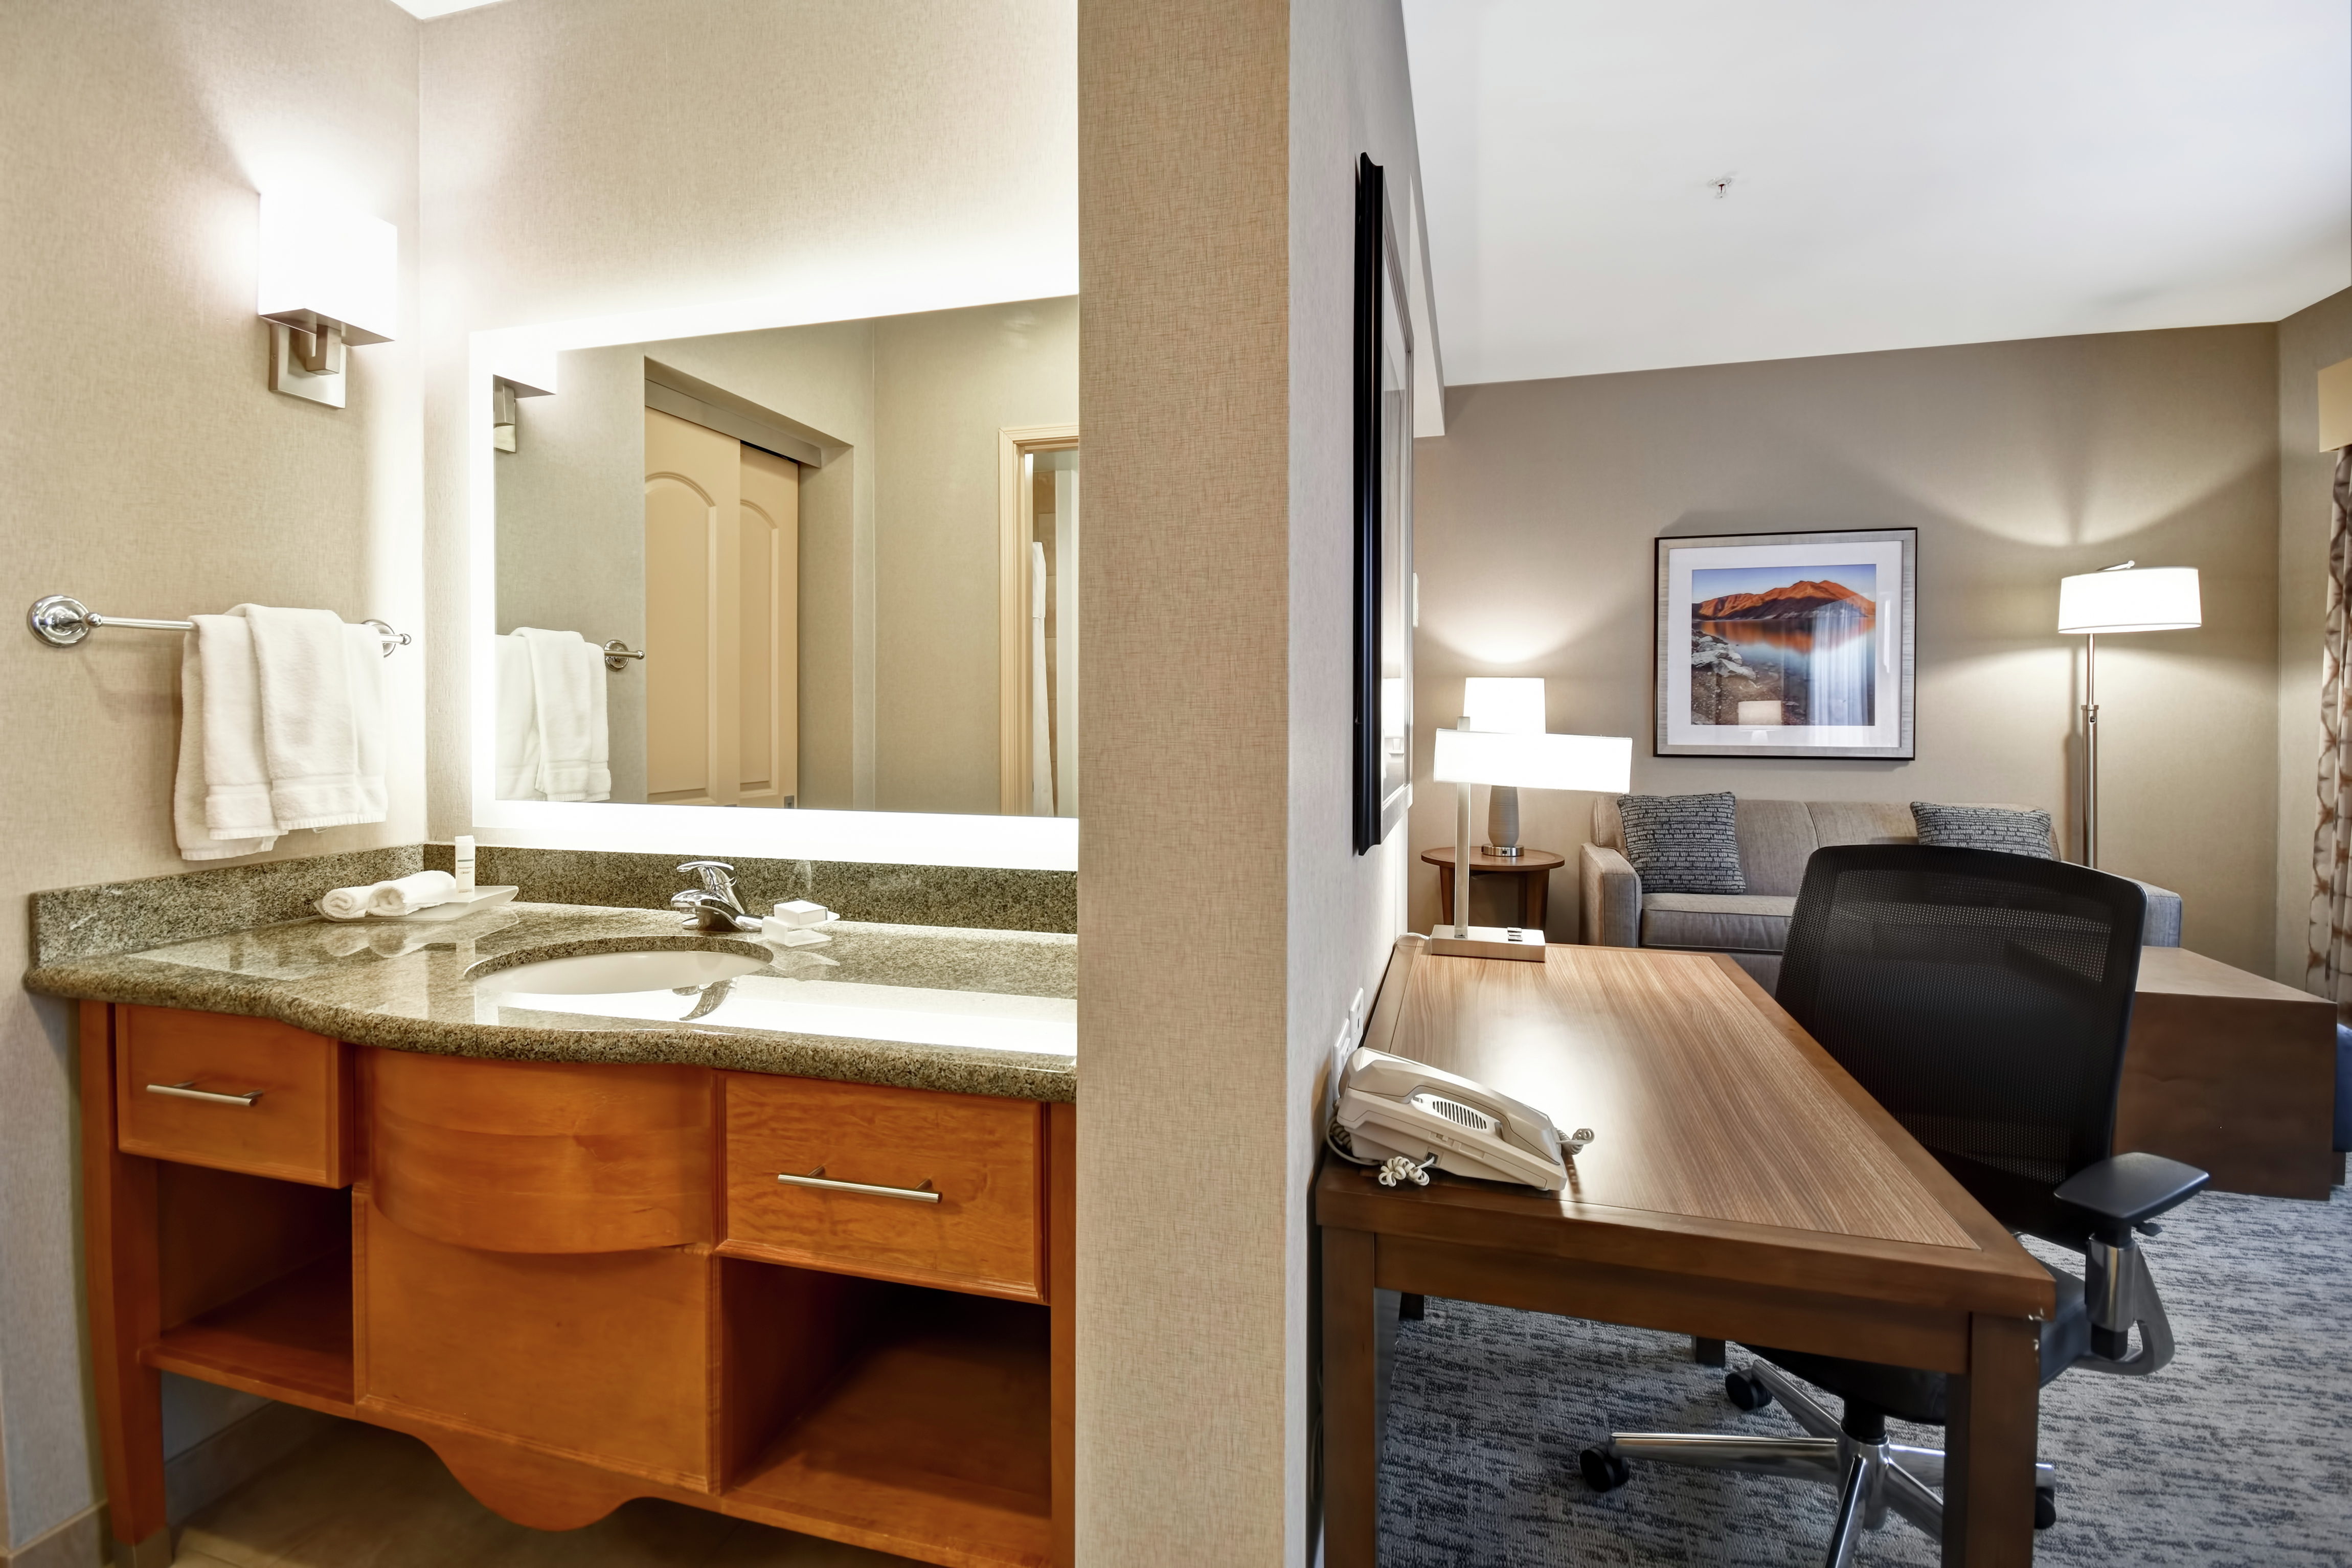 Suite Work Desk and Bathroom Counter